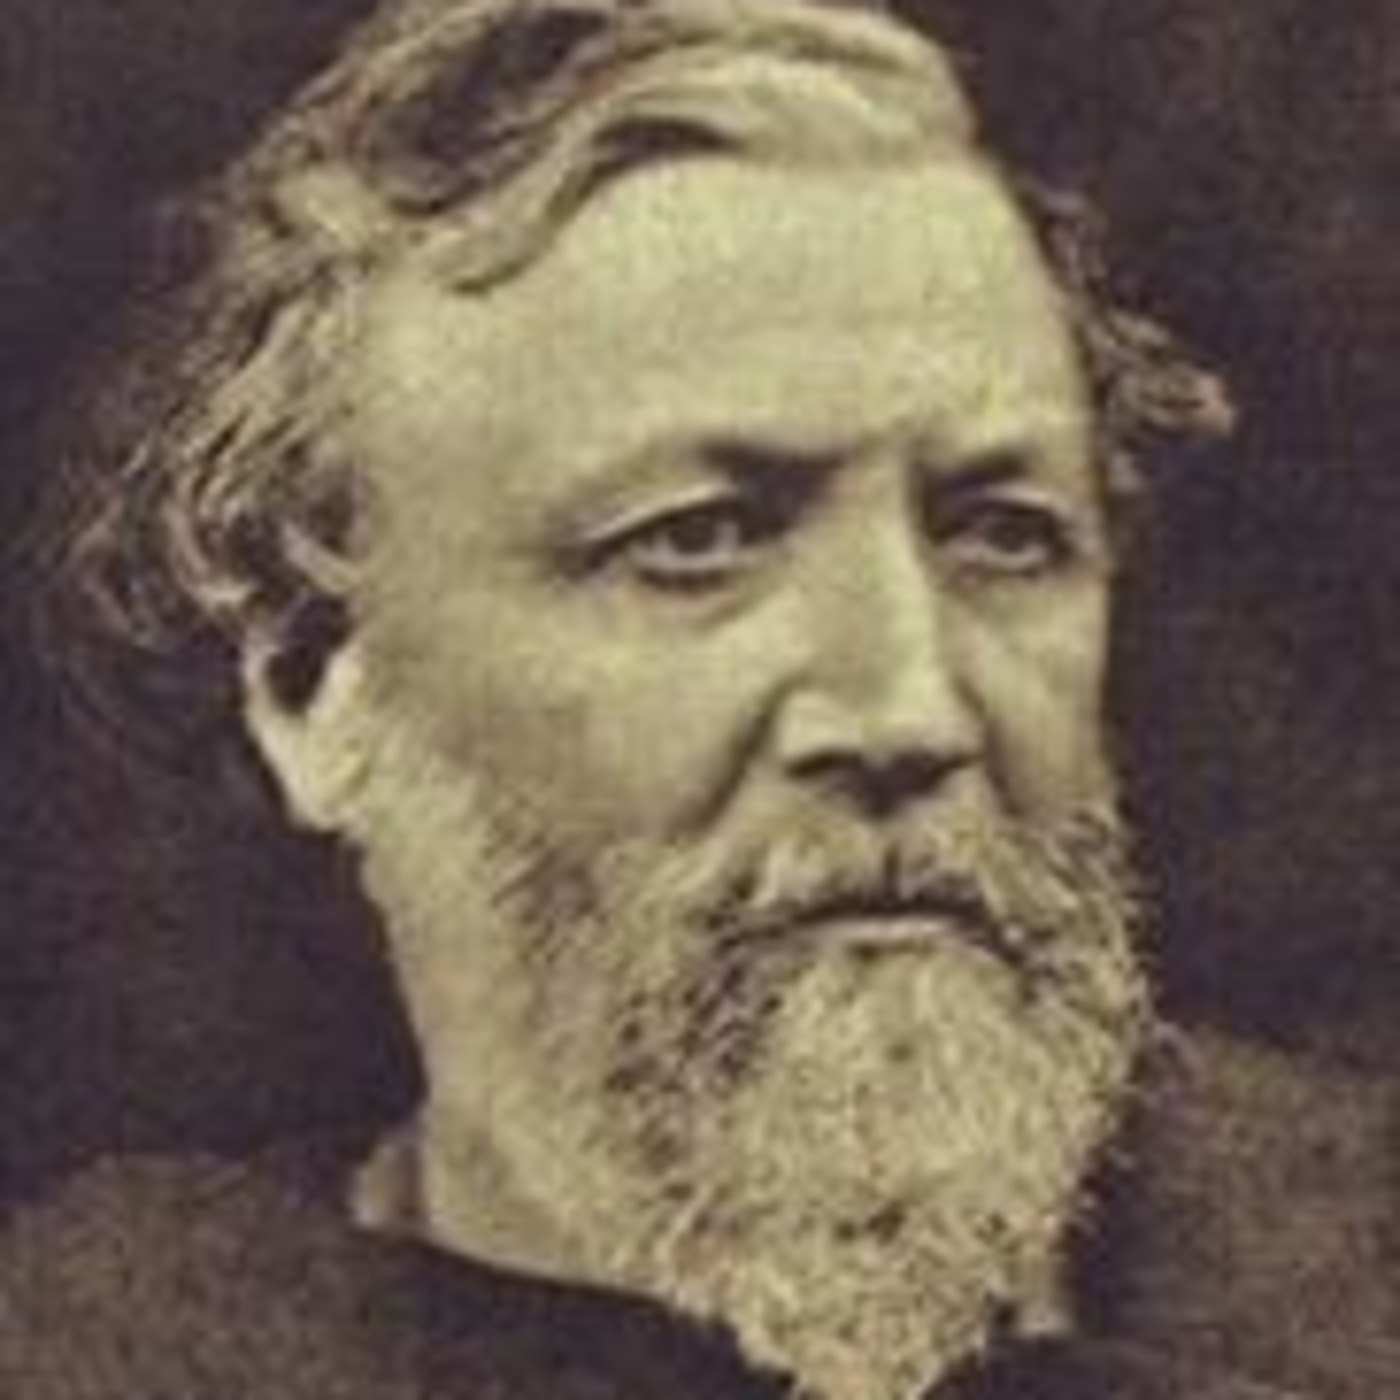 607. The Lost Mistress by Robert Browning